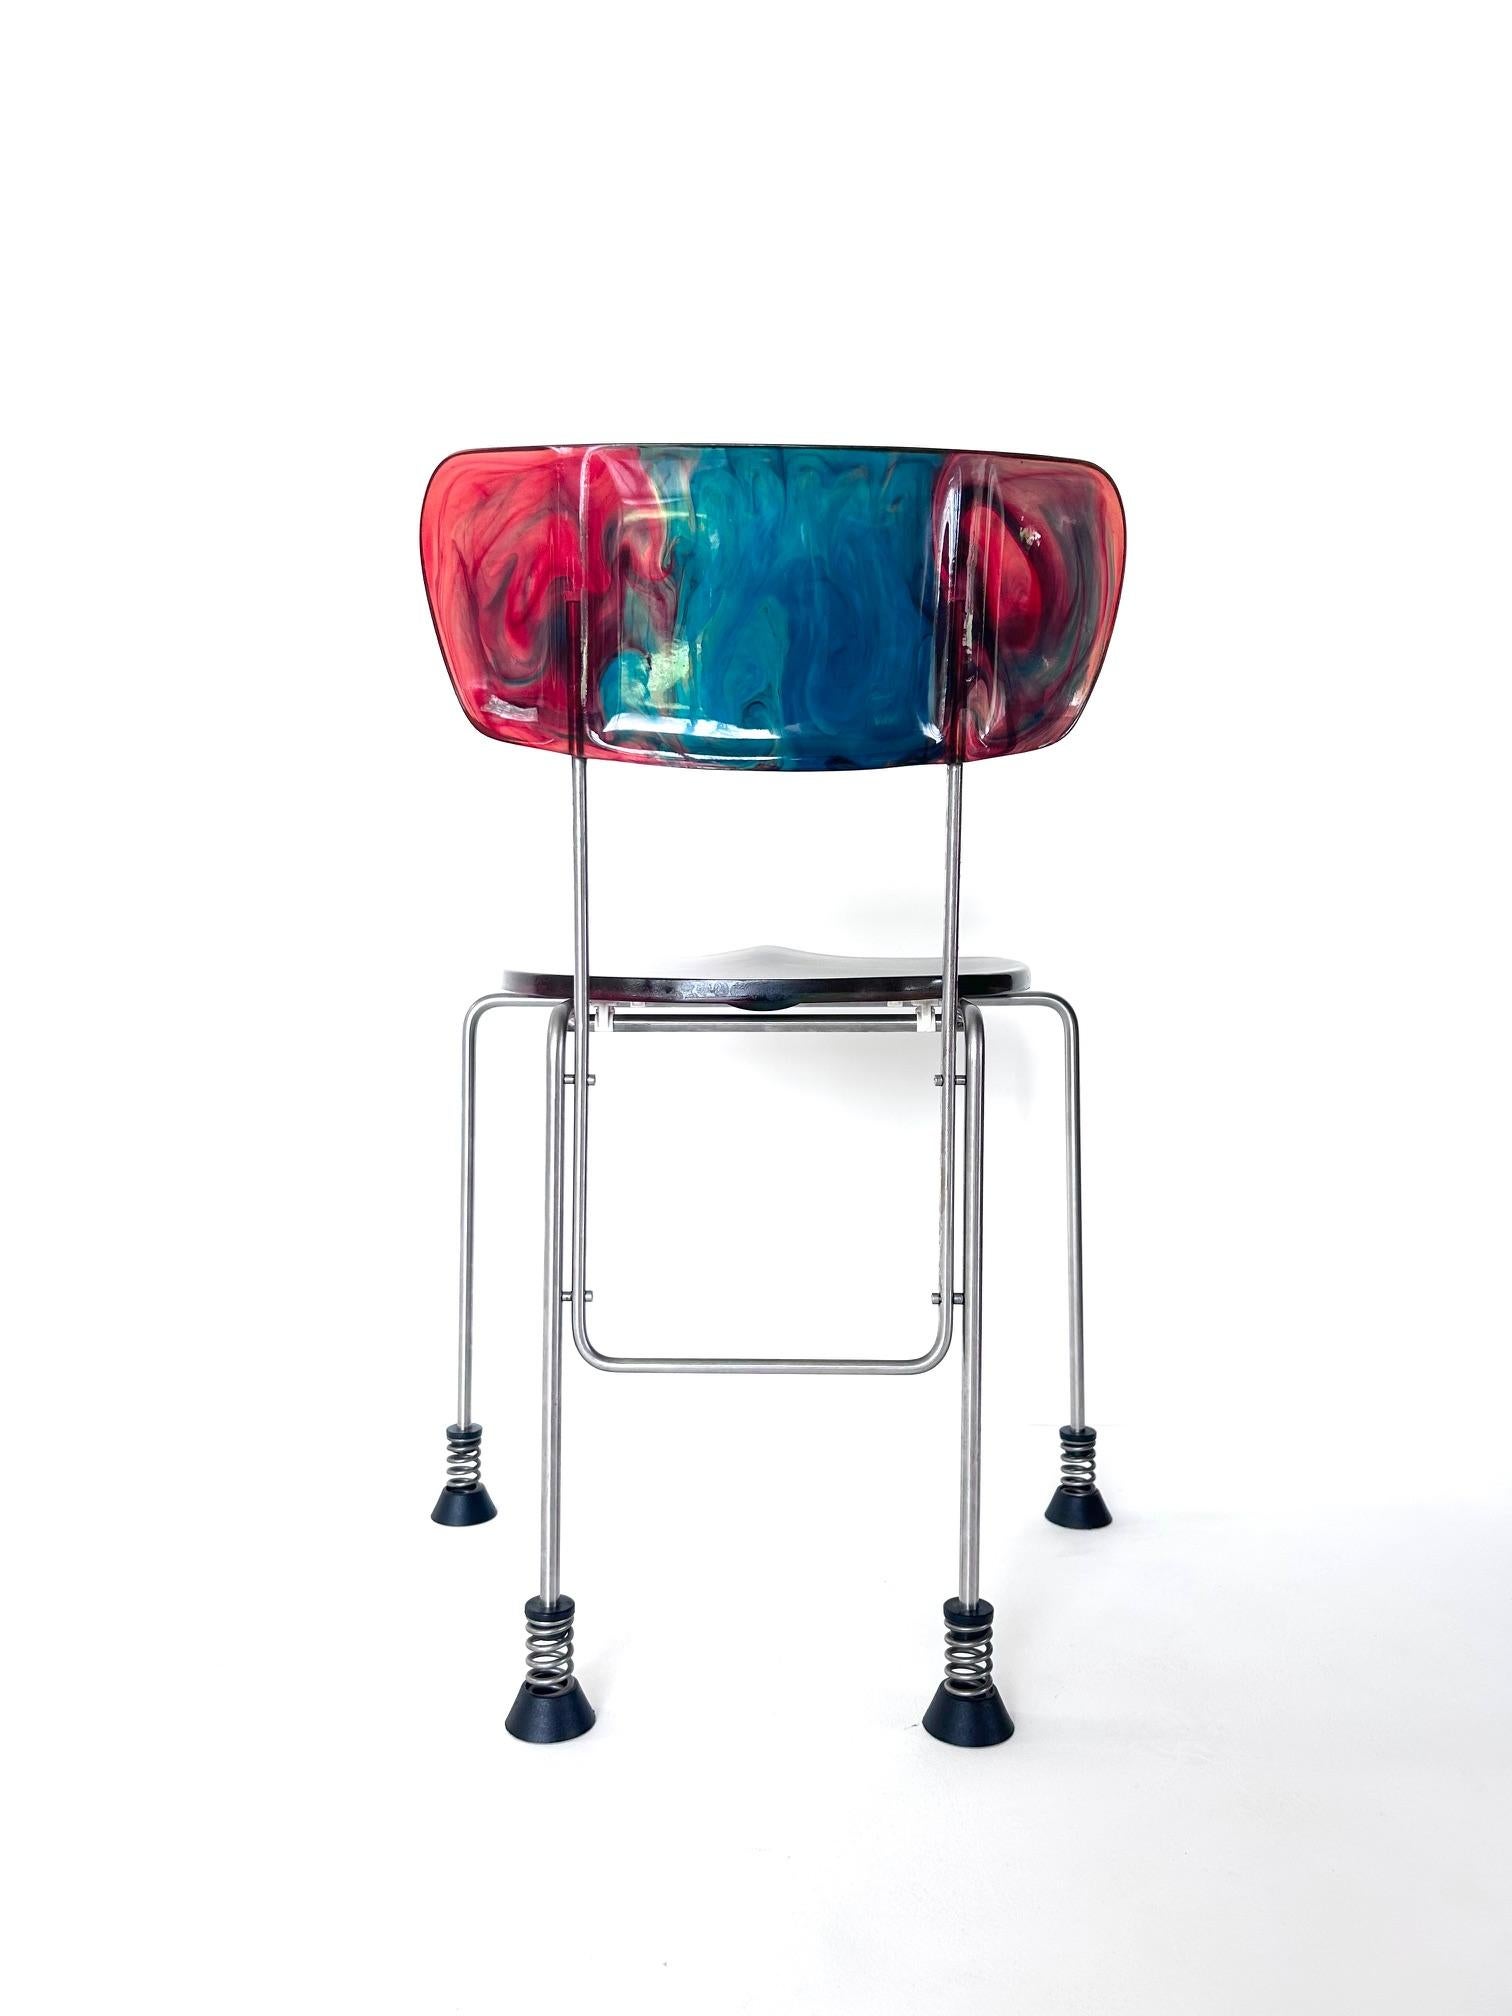 Broadway chair, Gaetano Pesce, Bernini, 1993

Gaetano Pesce ‘Broadway’ chair produced by Bernini with four rubber-capped feet standing on springs. 
Model 543, created in 1993 for Bernini
Epoxy resin back and seat
Stainless steel structure